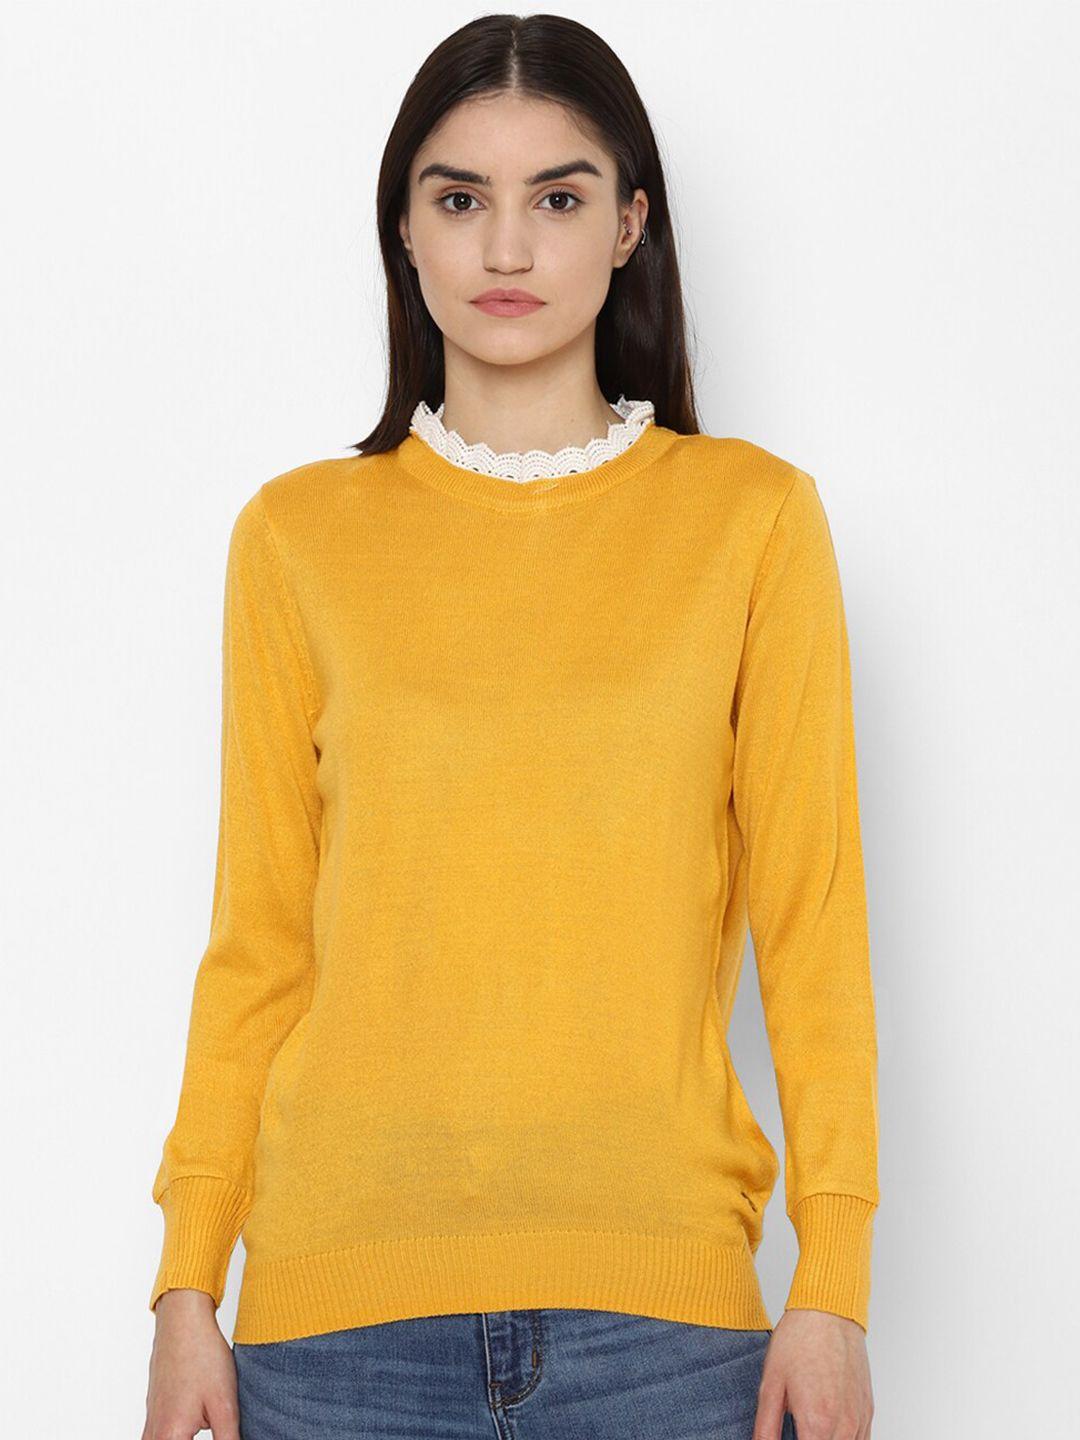 allen-solly-woman-women-yellow-&-white-solid-round-neck-pullover